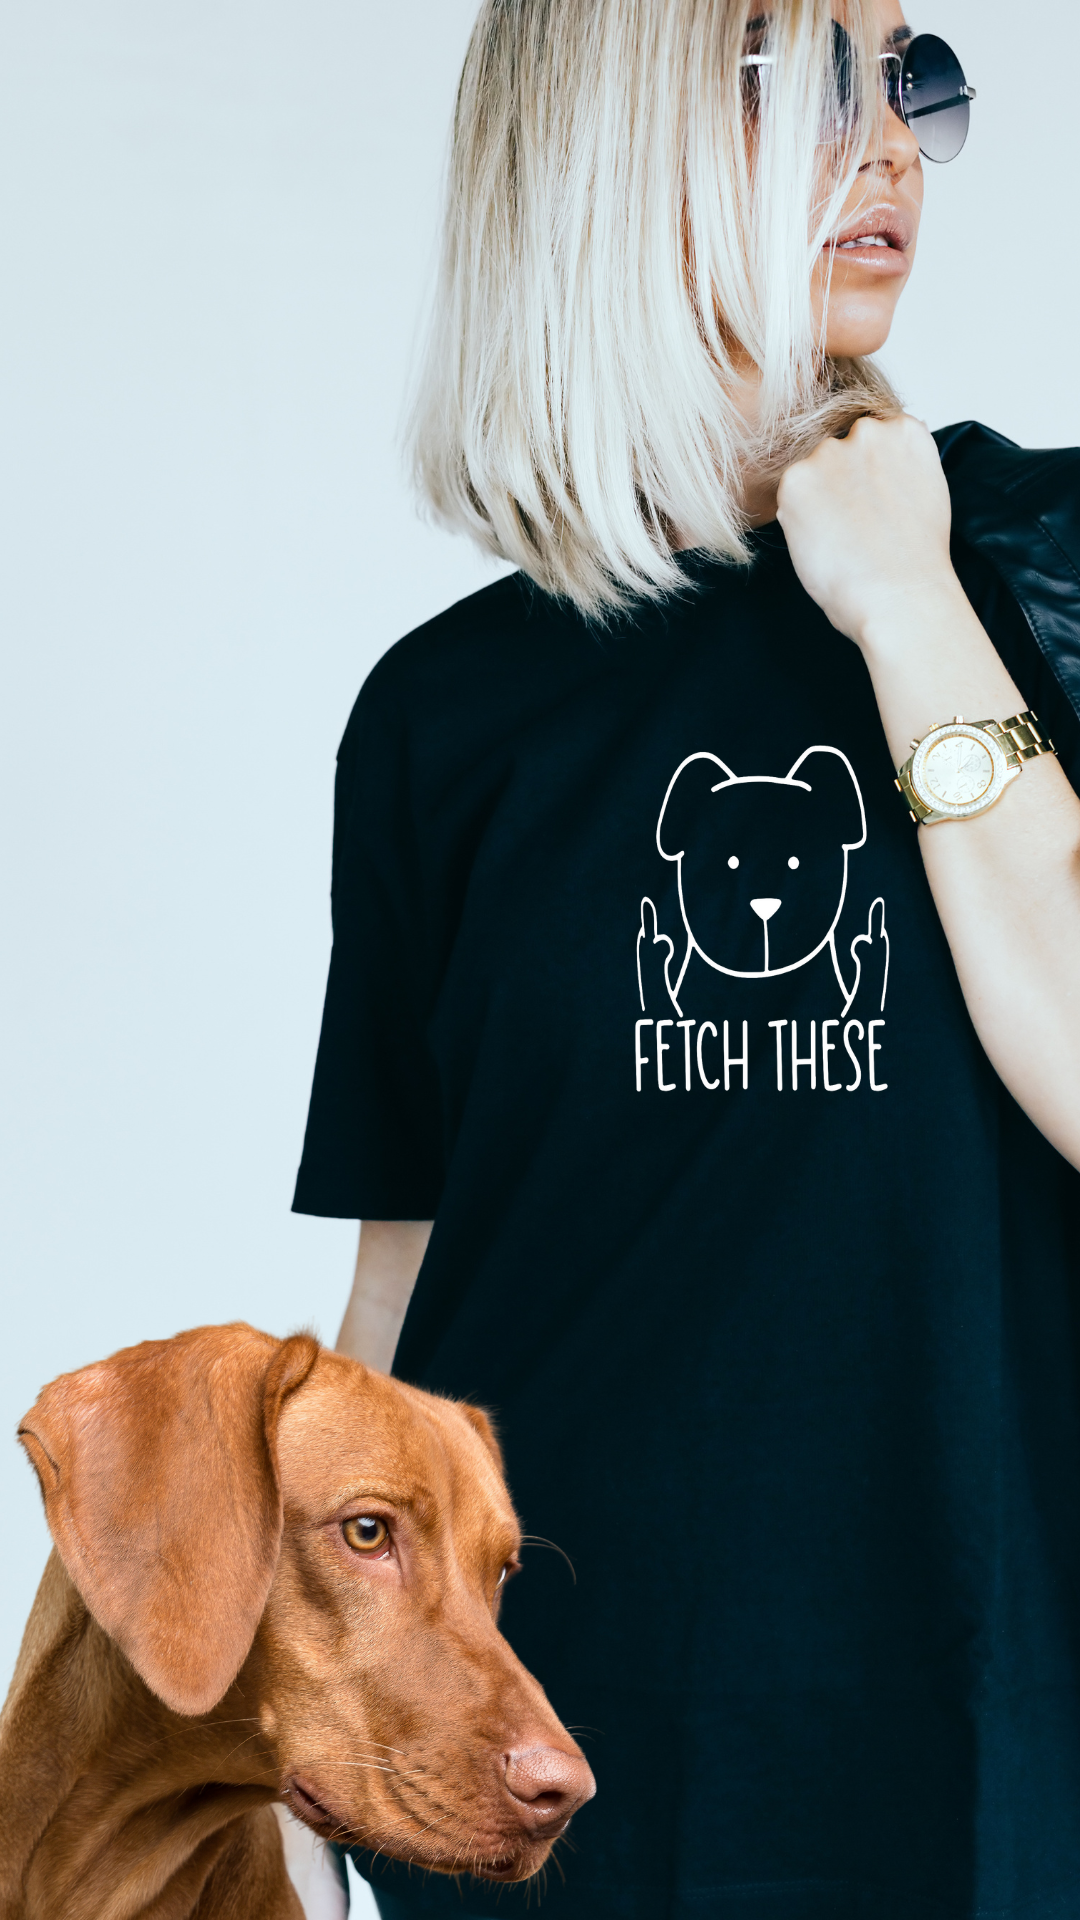 TDFT "FETCH THESE" TEE